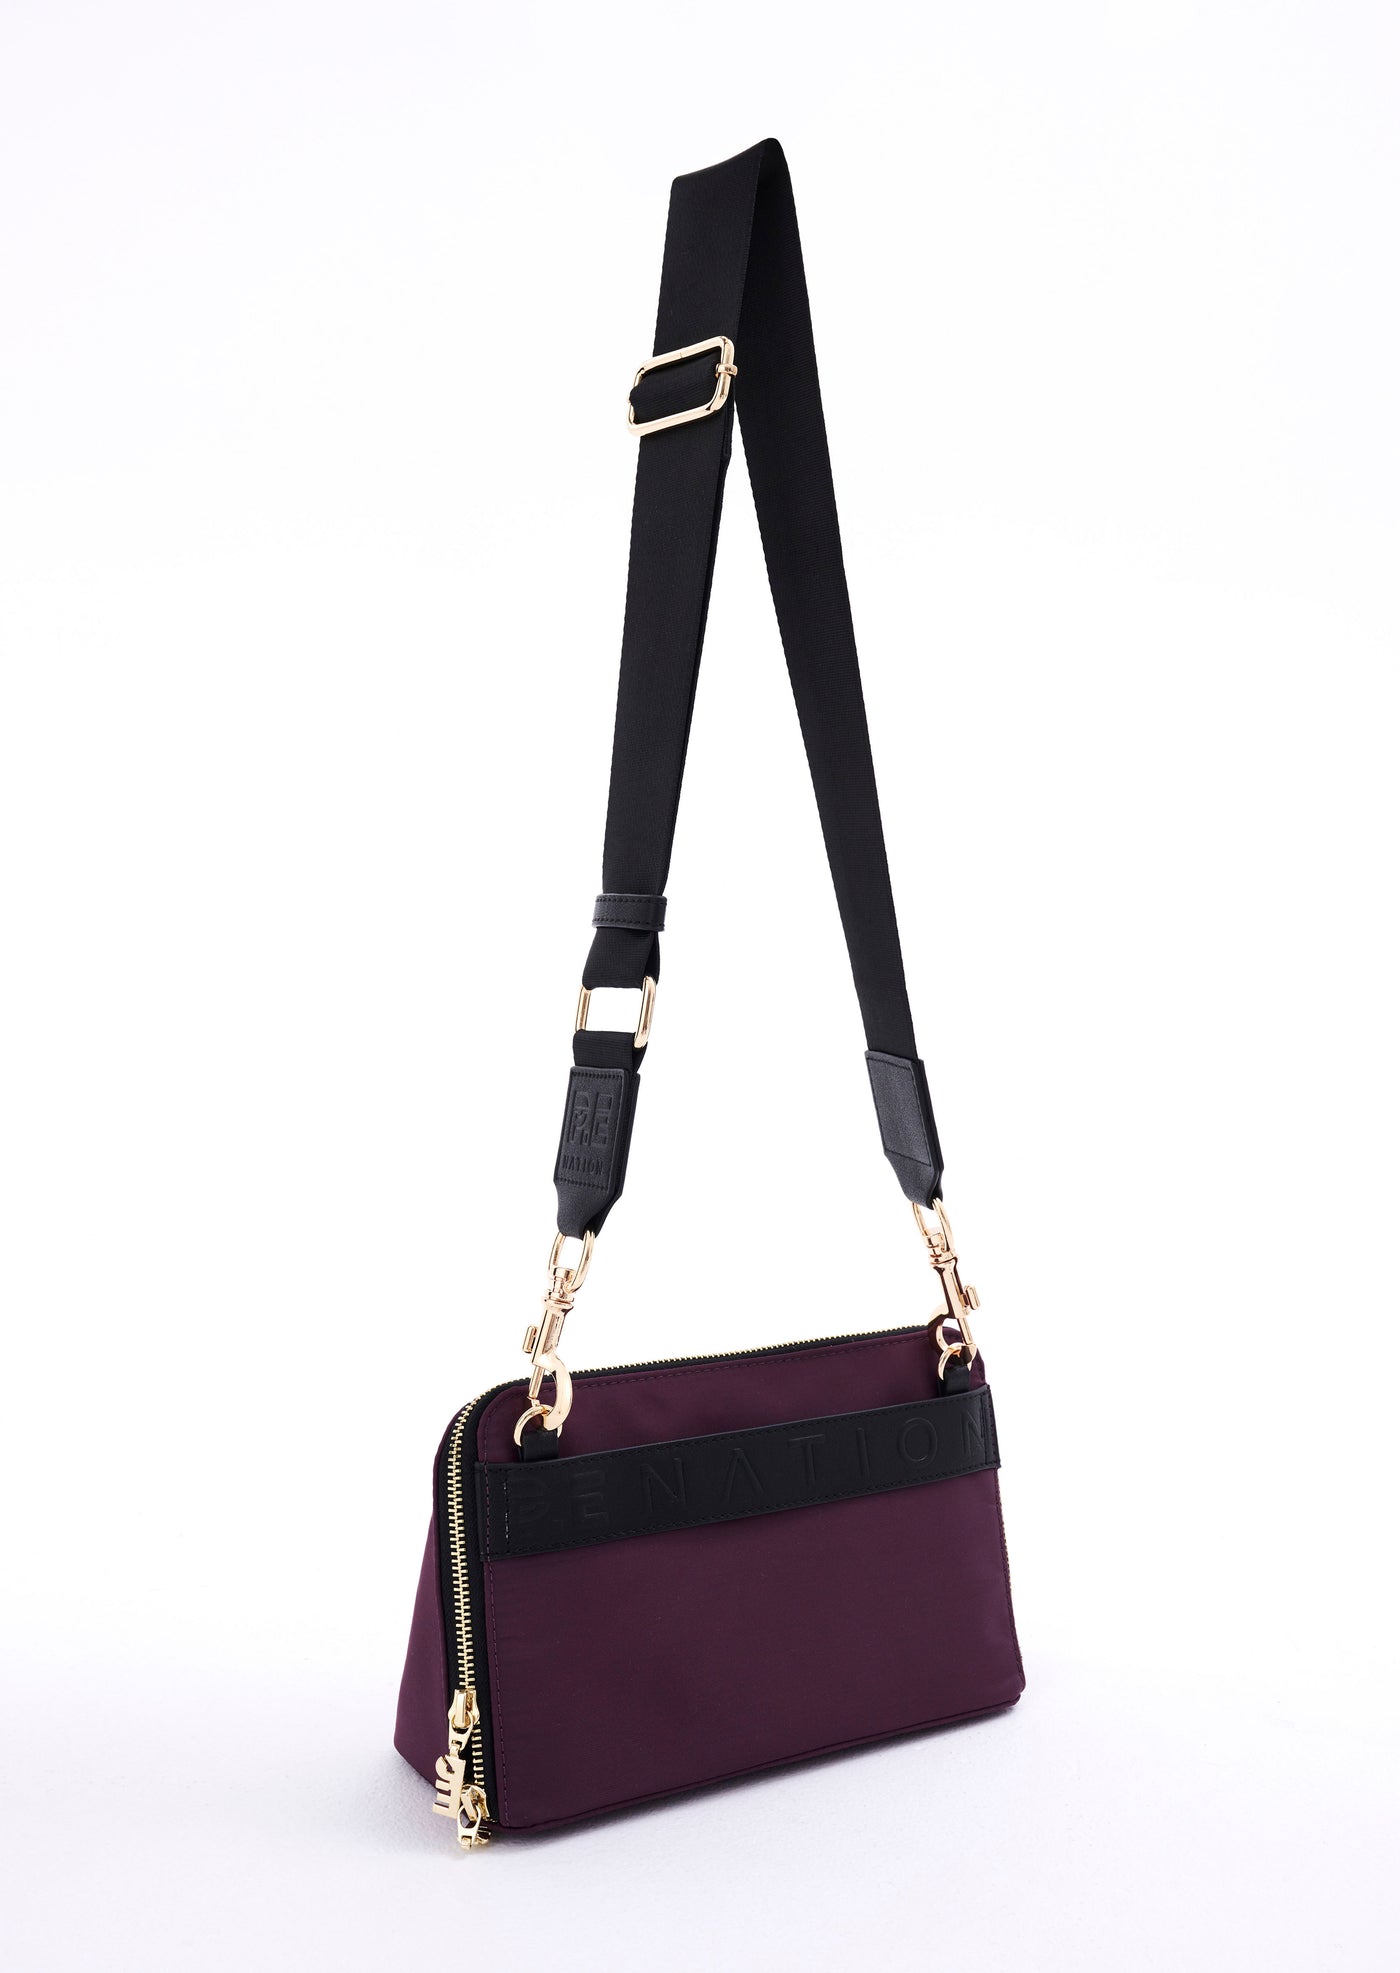 CHIRON BAG IN POTENT PURPLE